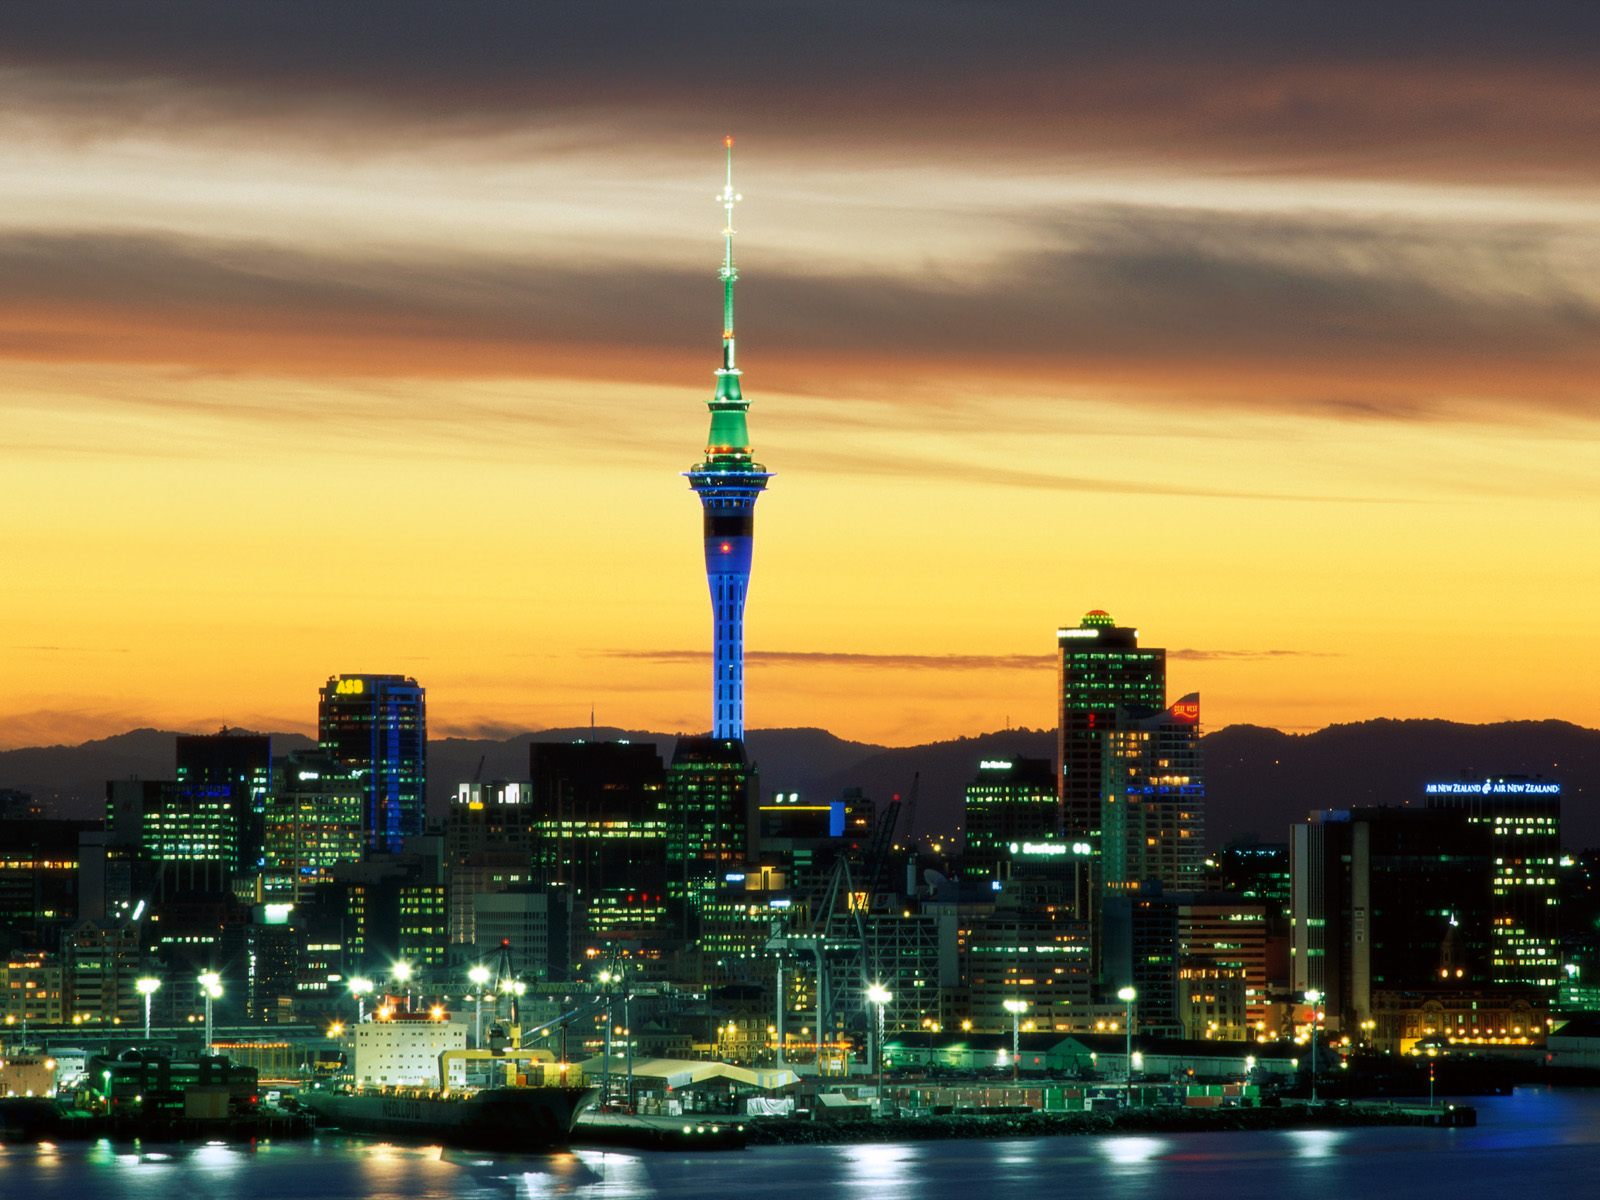 Our trip to New Zealand: Top 5 famous places in New Zealand